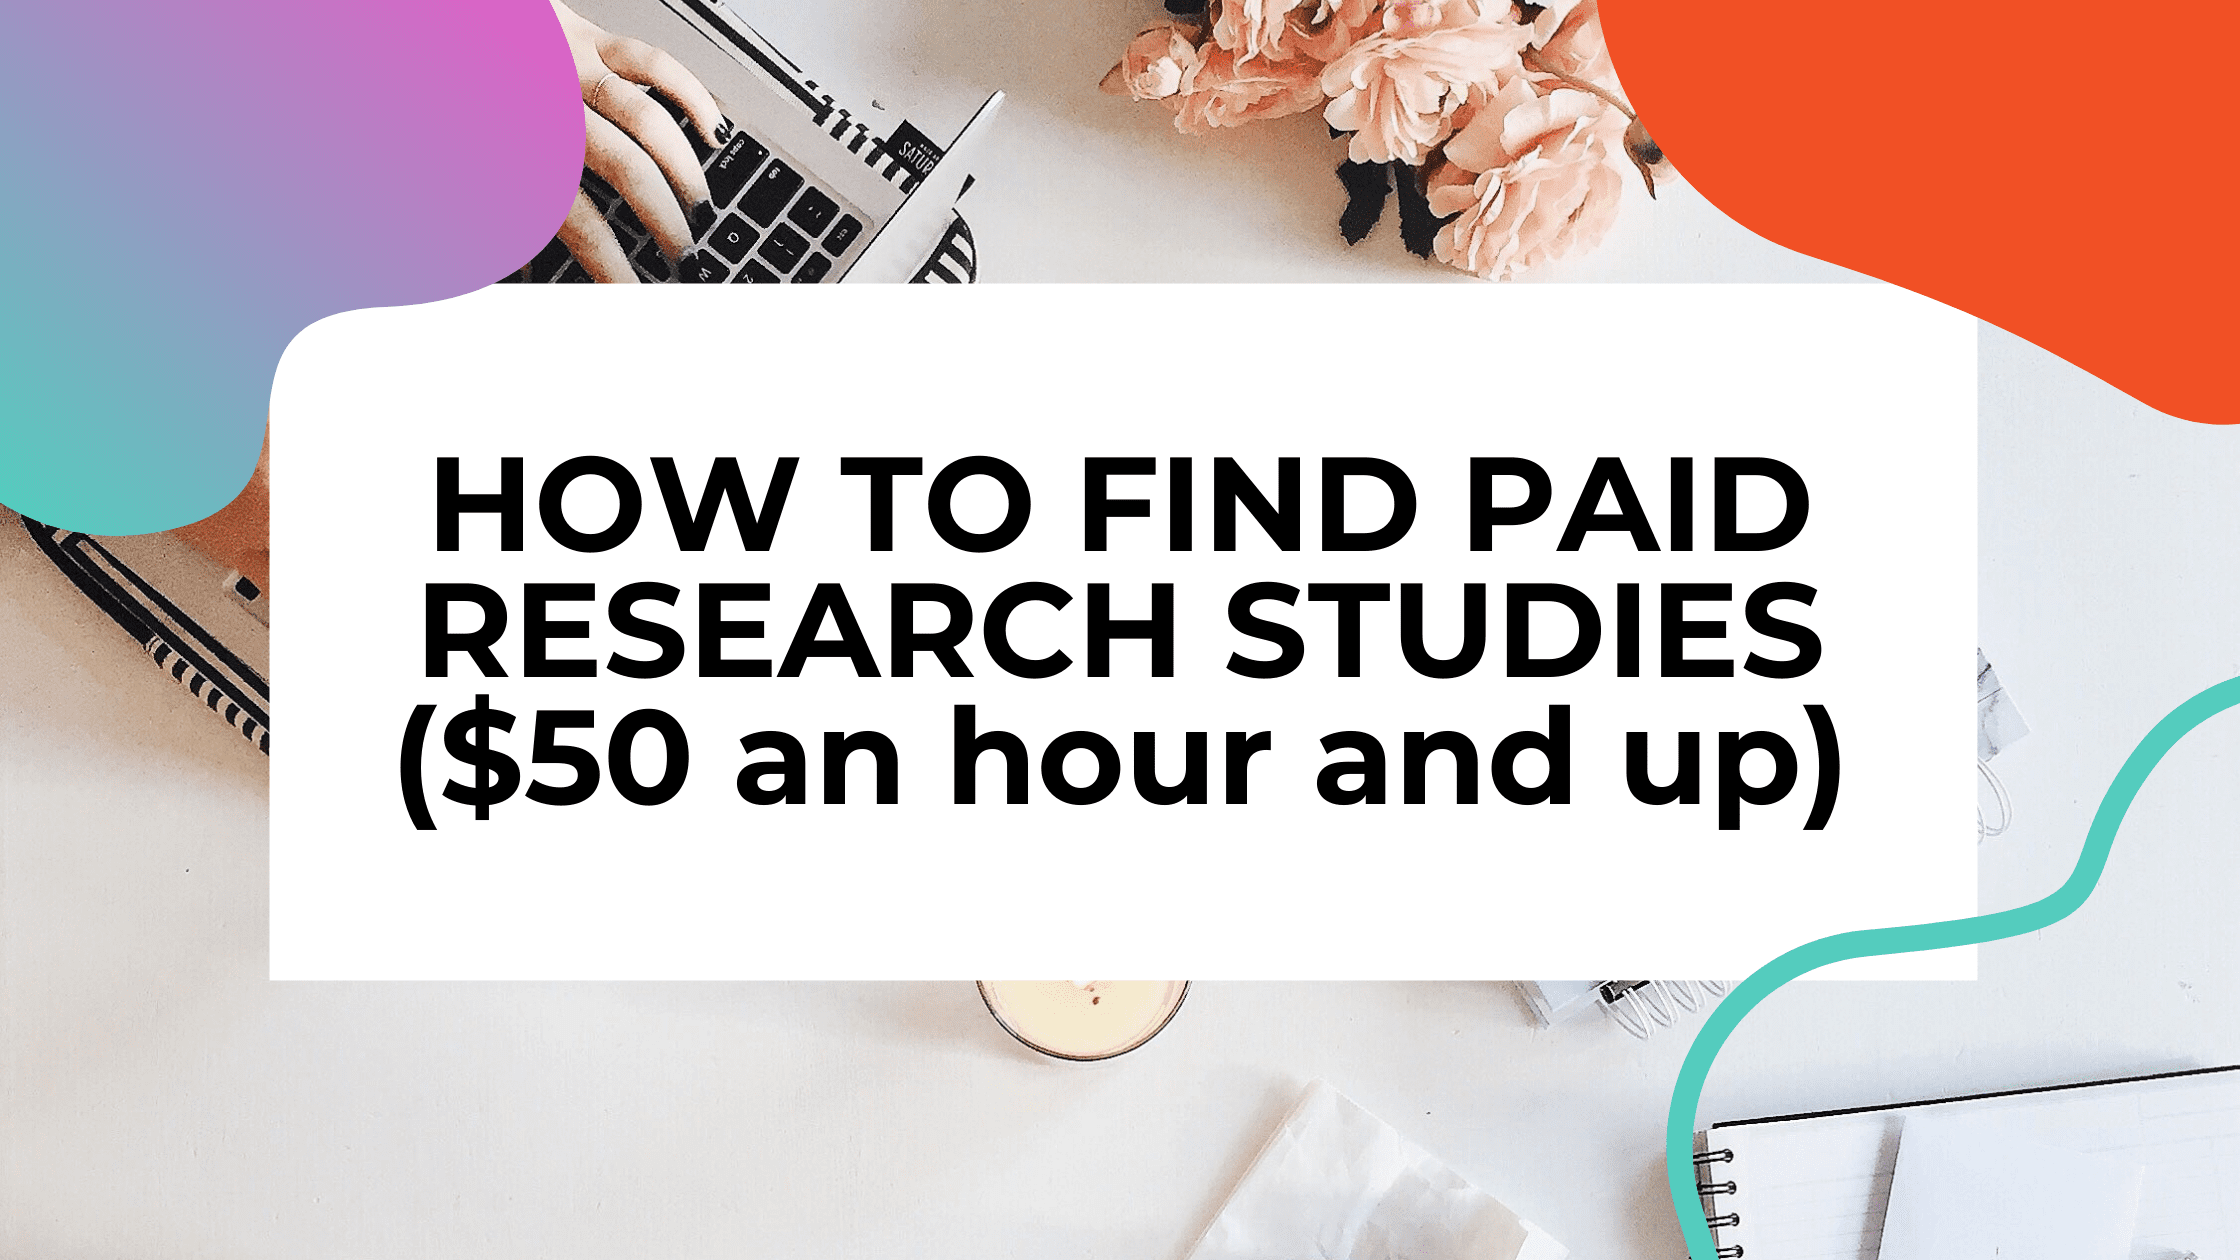 How to Find Paid Research Studies That Pay 50+ an Hour